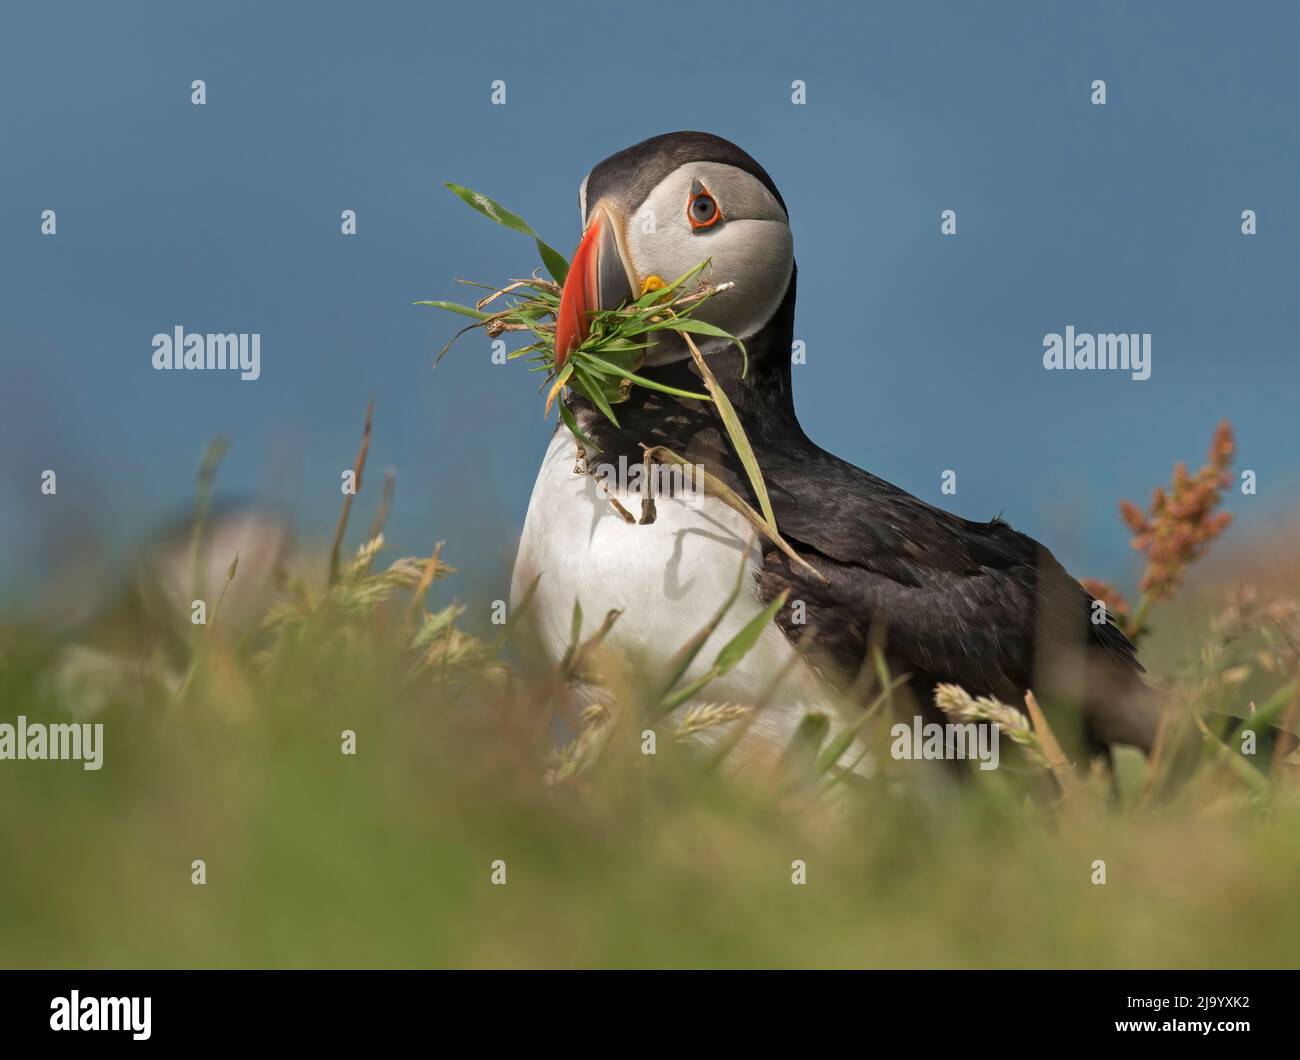 Atlantic puffin, Common puffin, Fratercula arctica, with nesting material in its beak, returning to burrow, Lundy Island, Scotland Stock Photo